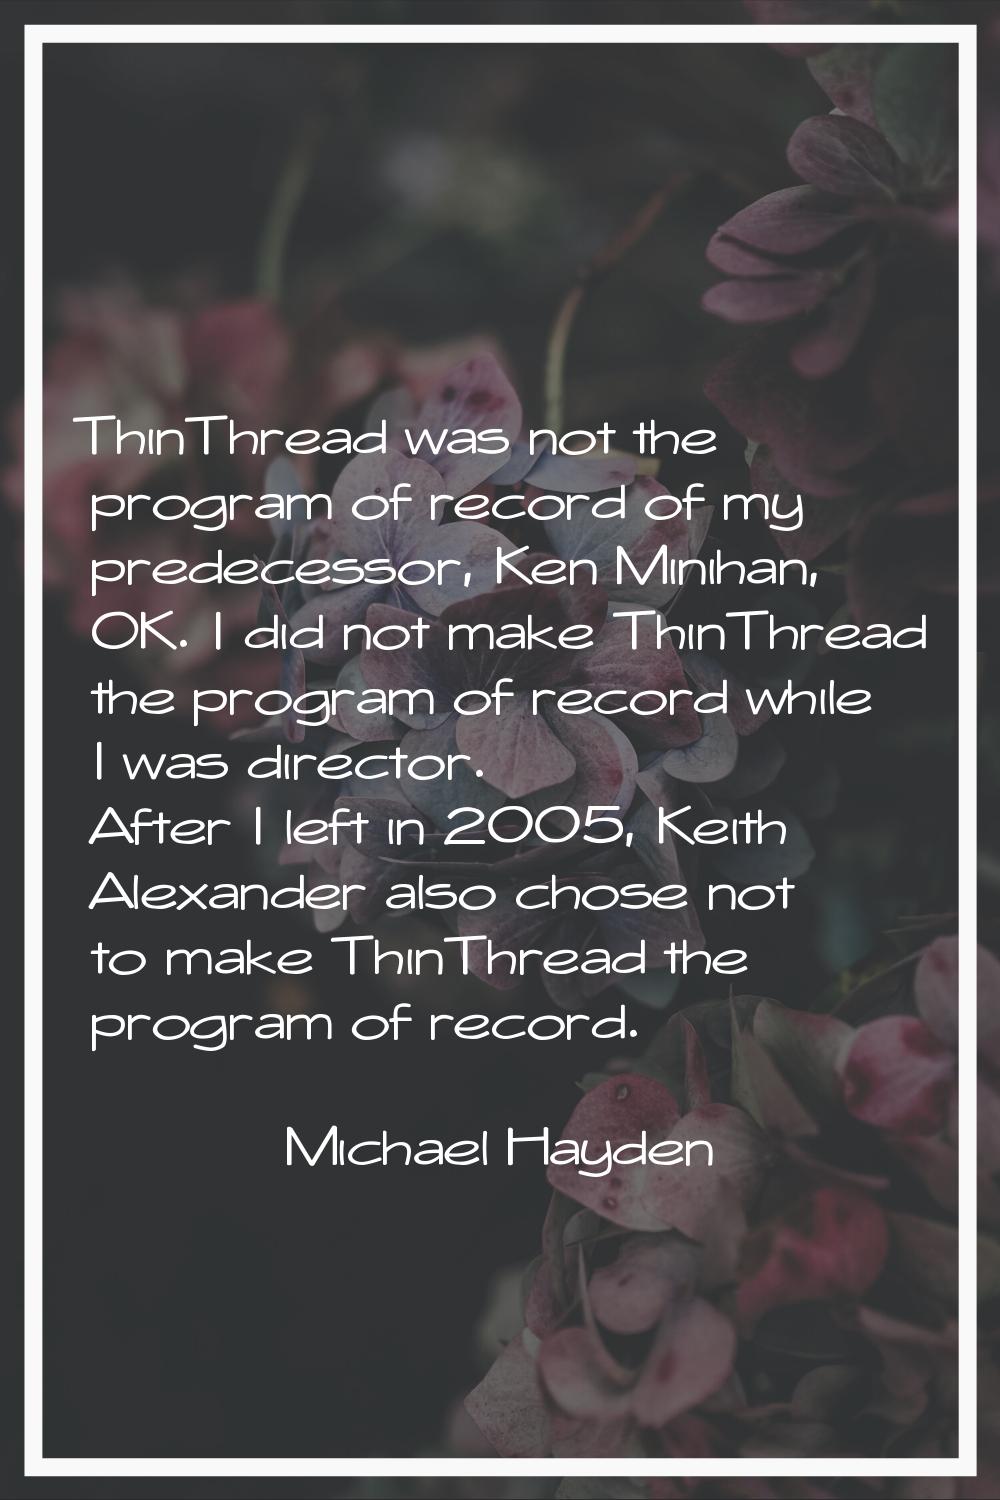 ThinThread was not the program of record of my predecessor, Ken Minihan, OK. I did not make ThinThr